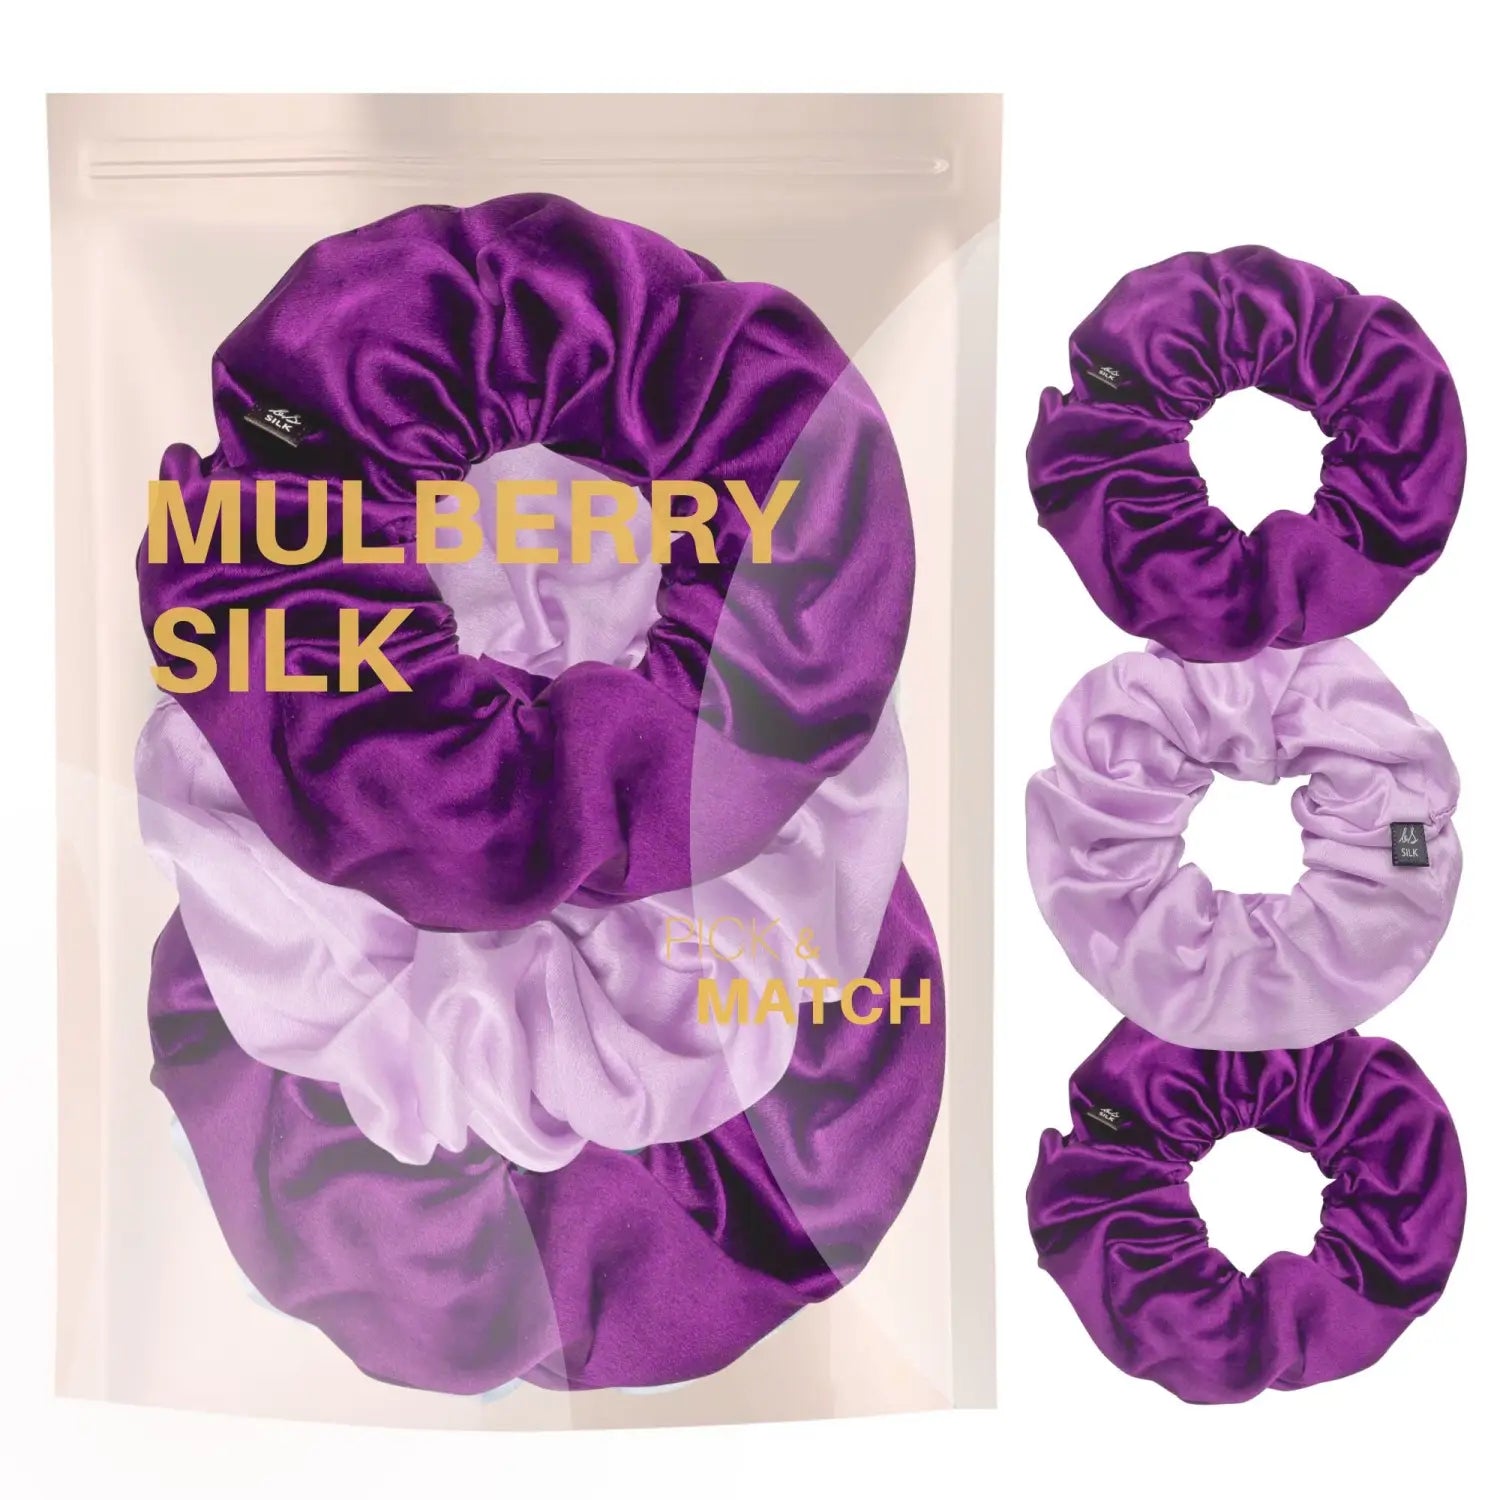 Mulberry Silk Hair Scrunchies in Purple and White Design, 3-Piece Set